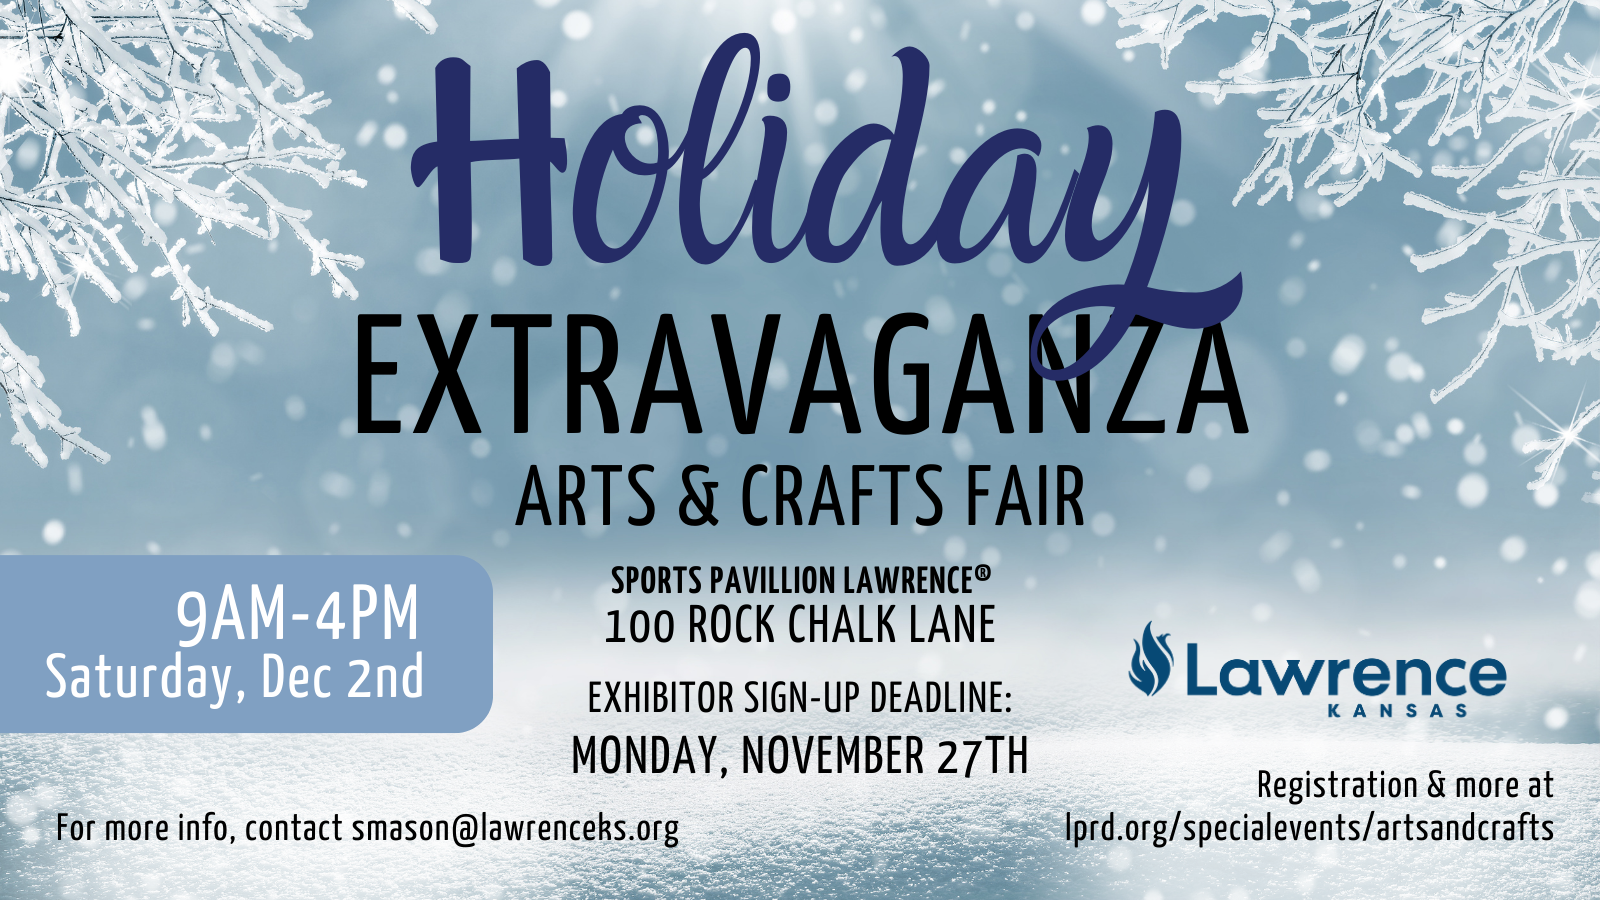 https://lawrenceks.org/wp-content/uploads/2023/07/Holiday-Extravaganza-Arts-Crafts-Fair-2023-social-2.png